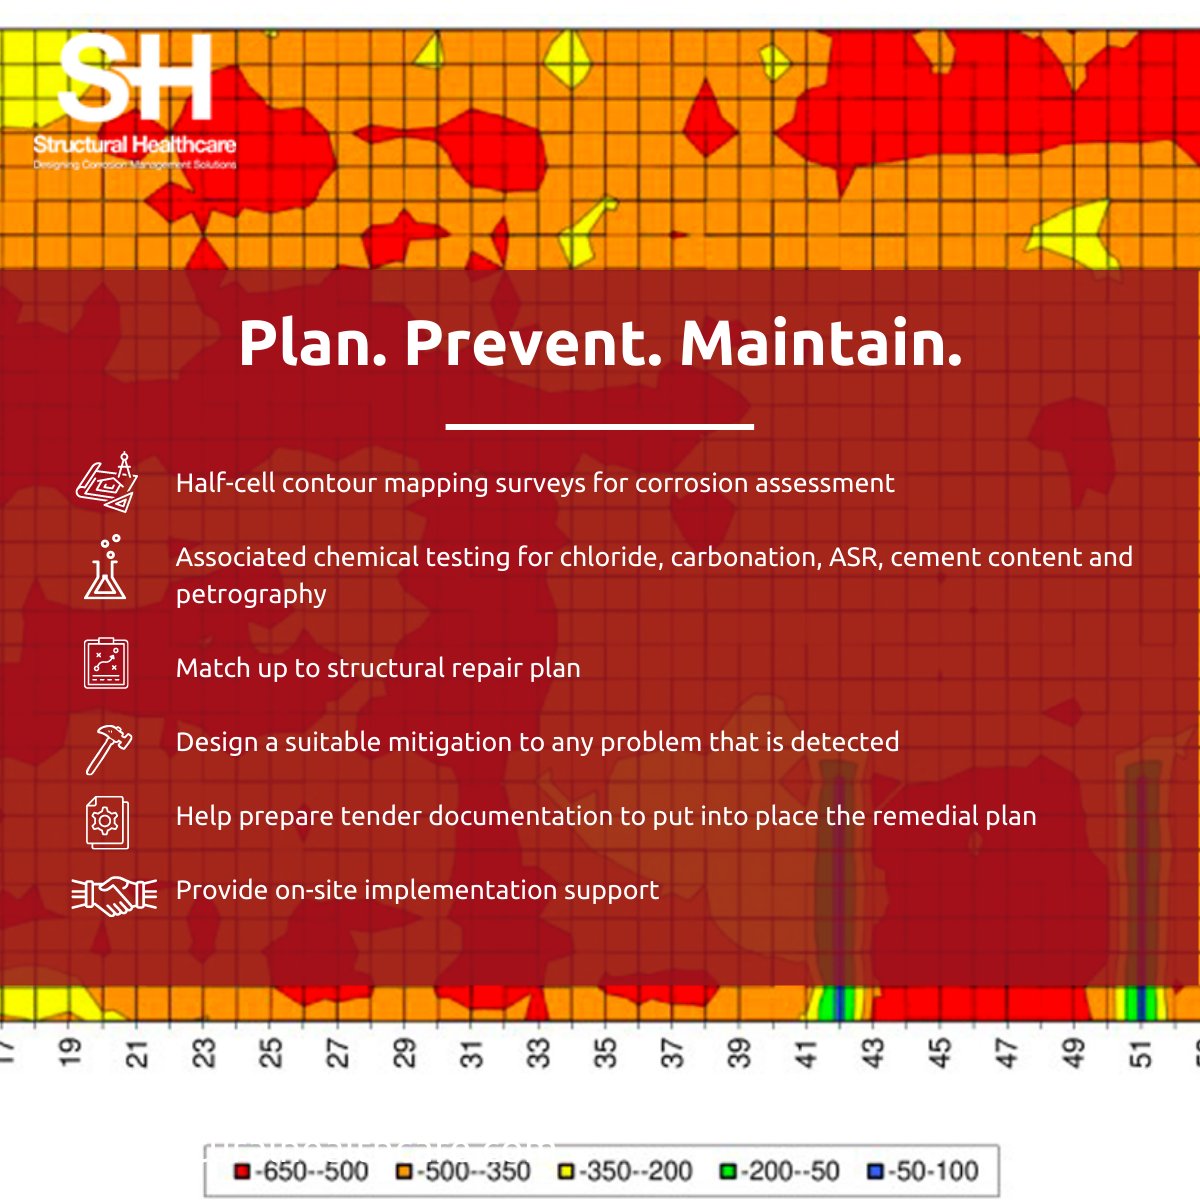 Plan. Prevent. Maintain 🏢👷‍♂️To tackle #corrosion, SHL take actions such as:

🗺️Half-cell contour mapping surveys
🧪Performing associated #chemicaltesting
✏️Design a suitable mitigation
📄Help prepare tender documentation
🤝On-site implementation 
structuralhealthcare.com/plan-prevent-m…